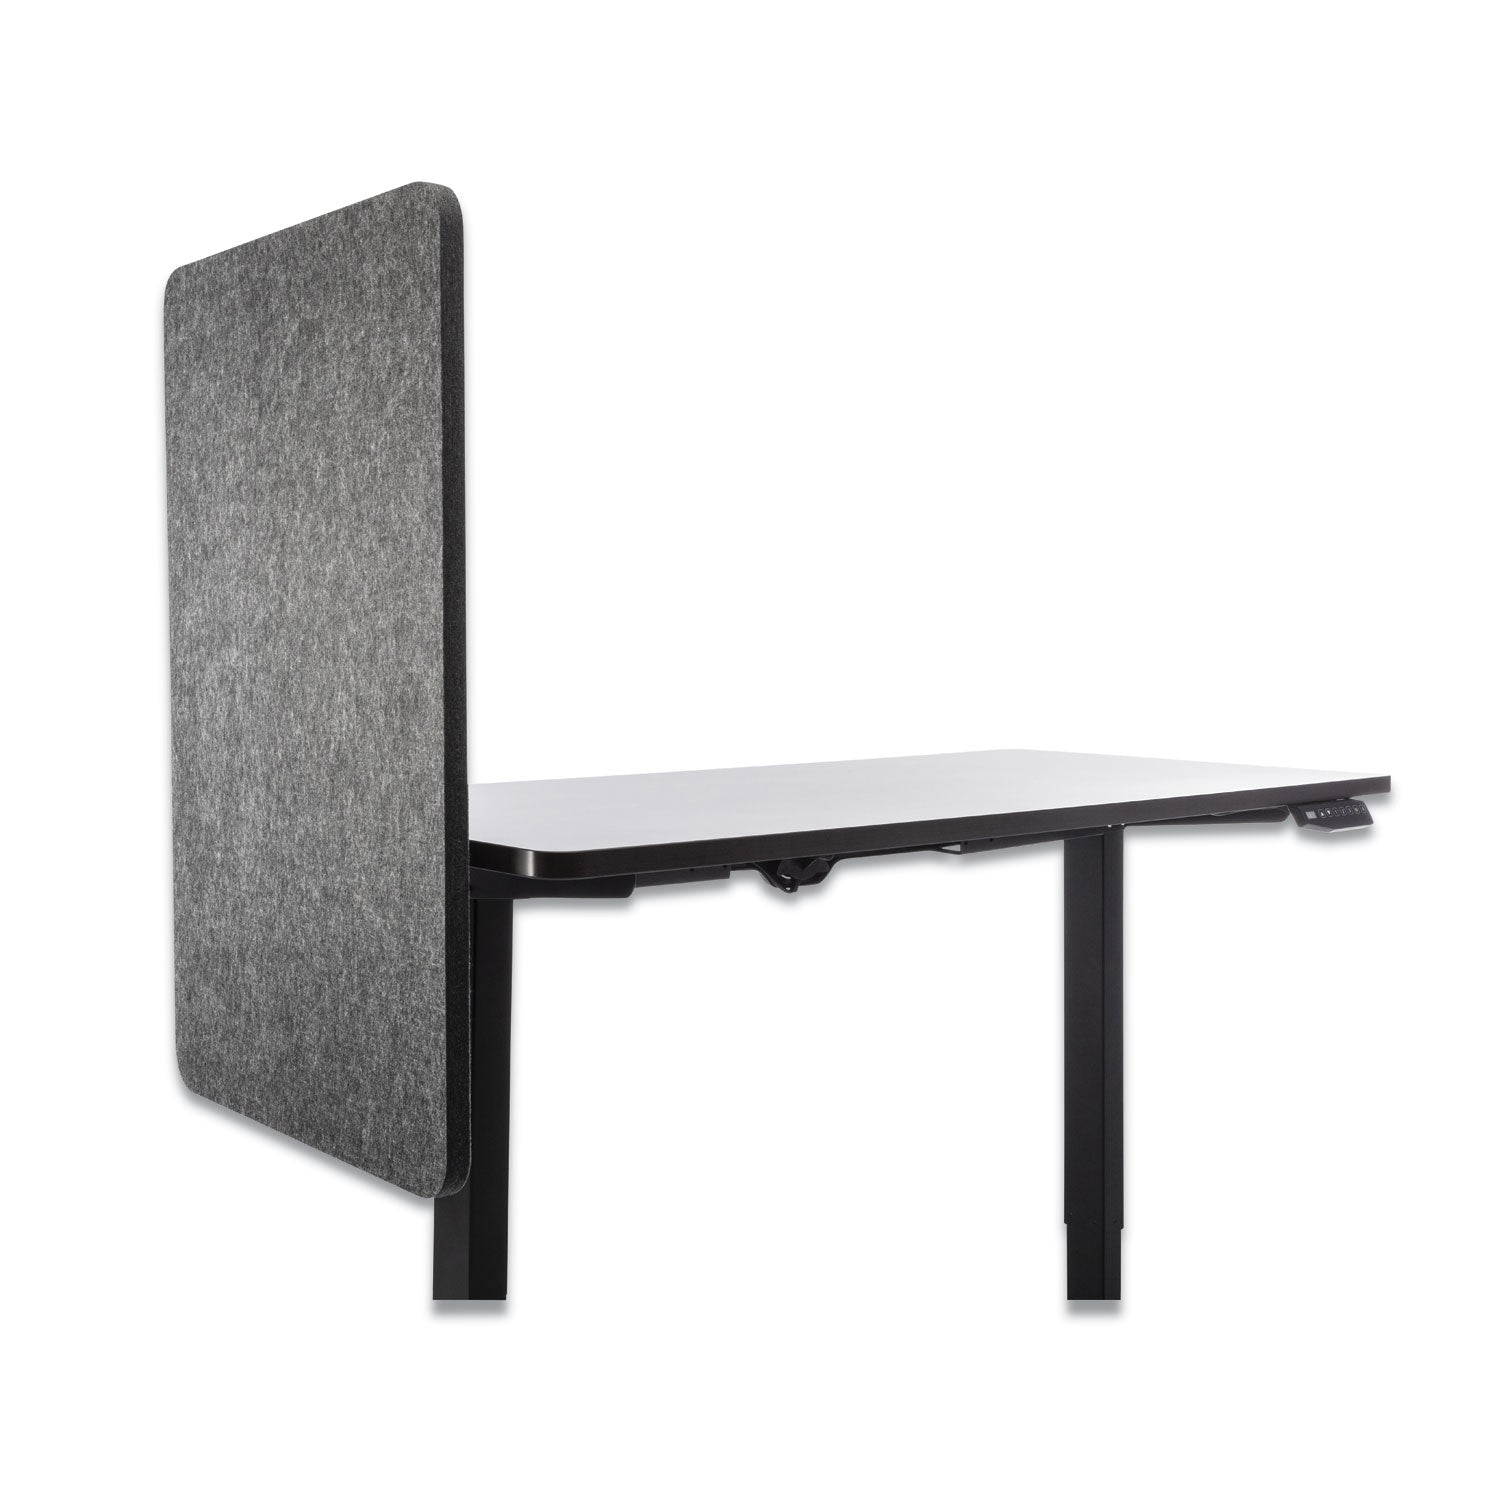 desk-modesty-adjustable-height-desk-screen-cubicle-divider-and-privacy-partition-235-x-1-x-36-polyester-ash_gn1ludm24361a - 3